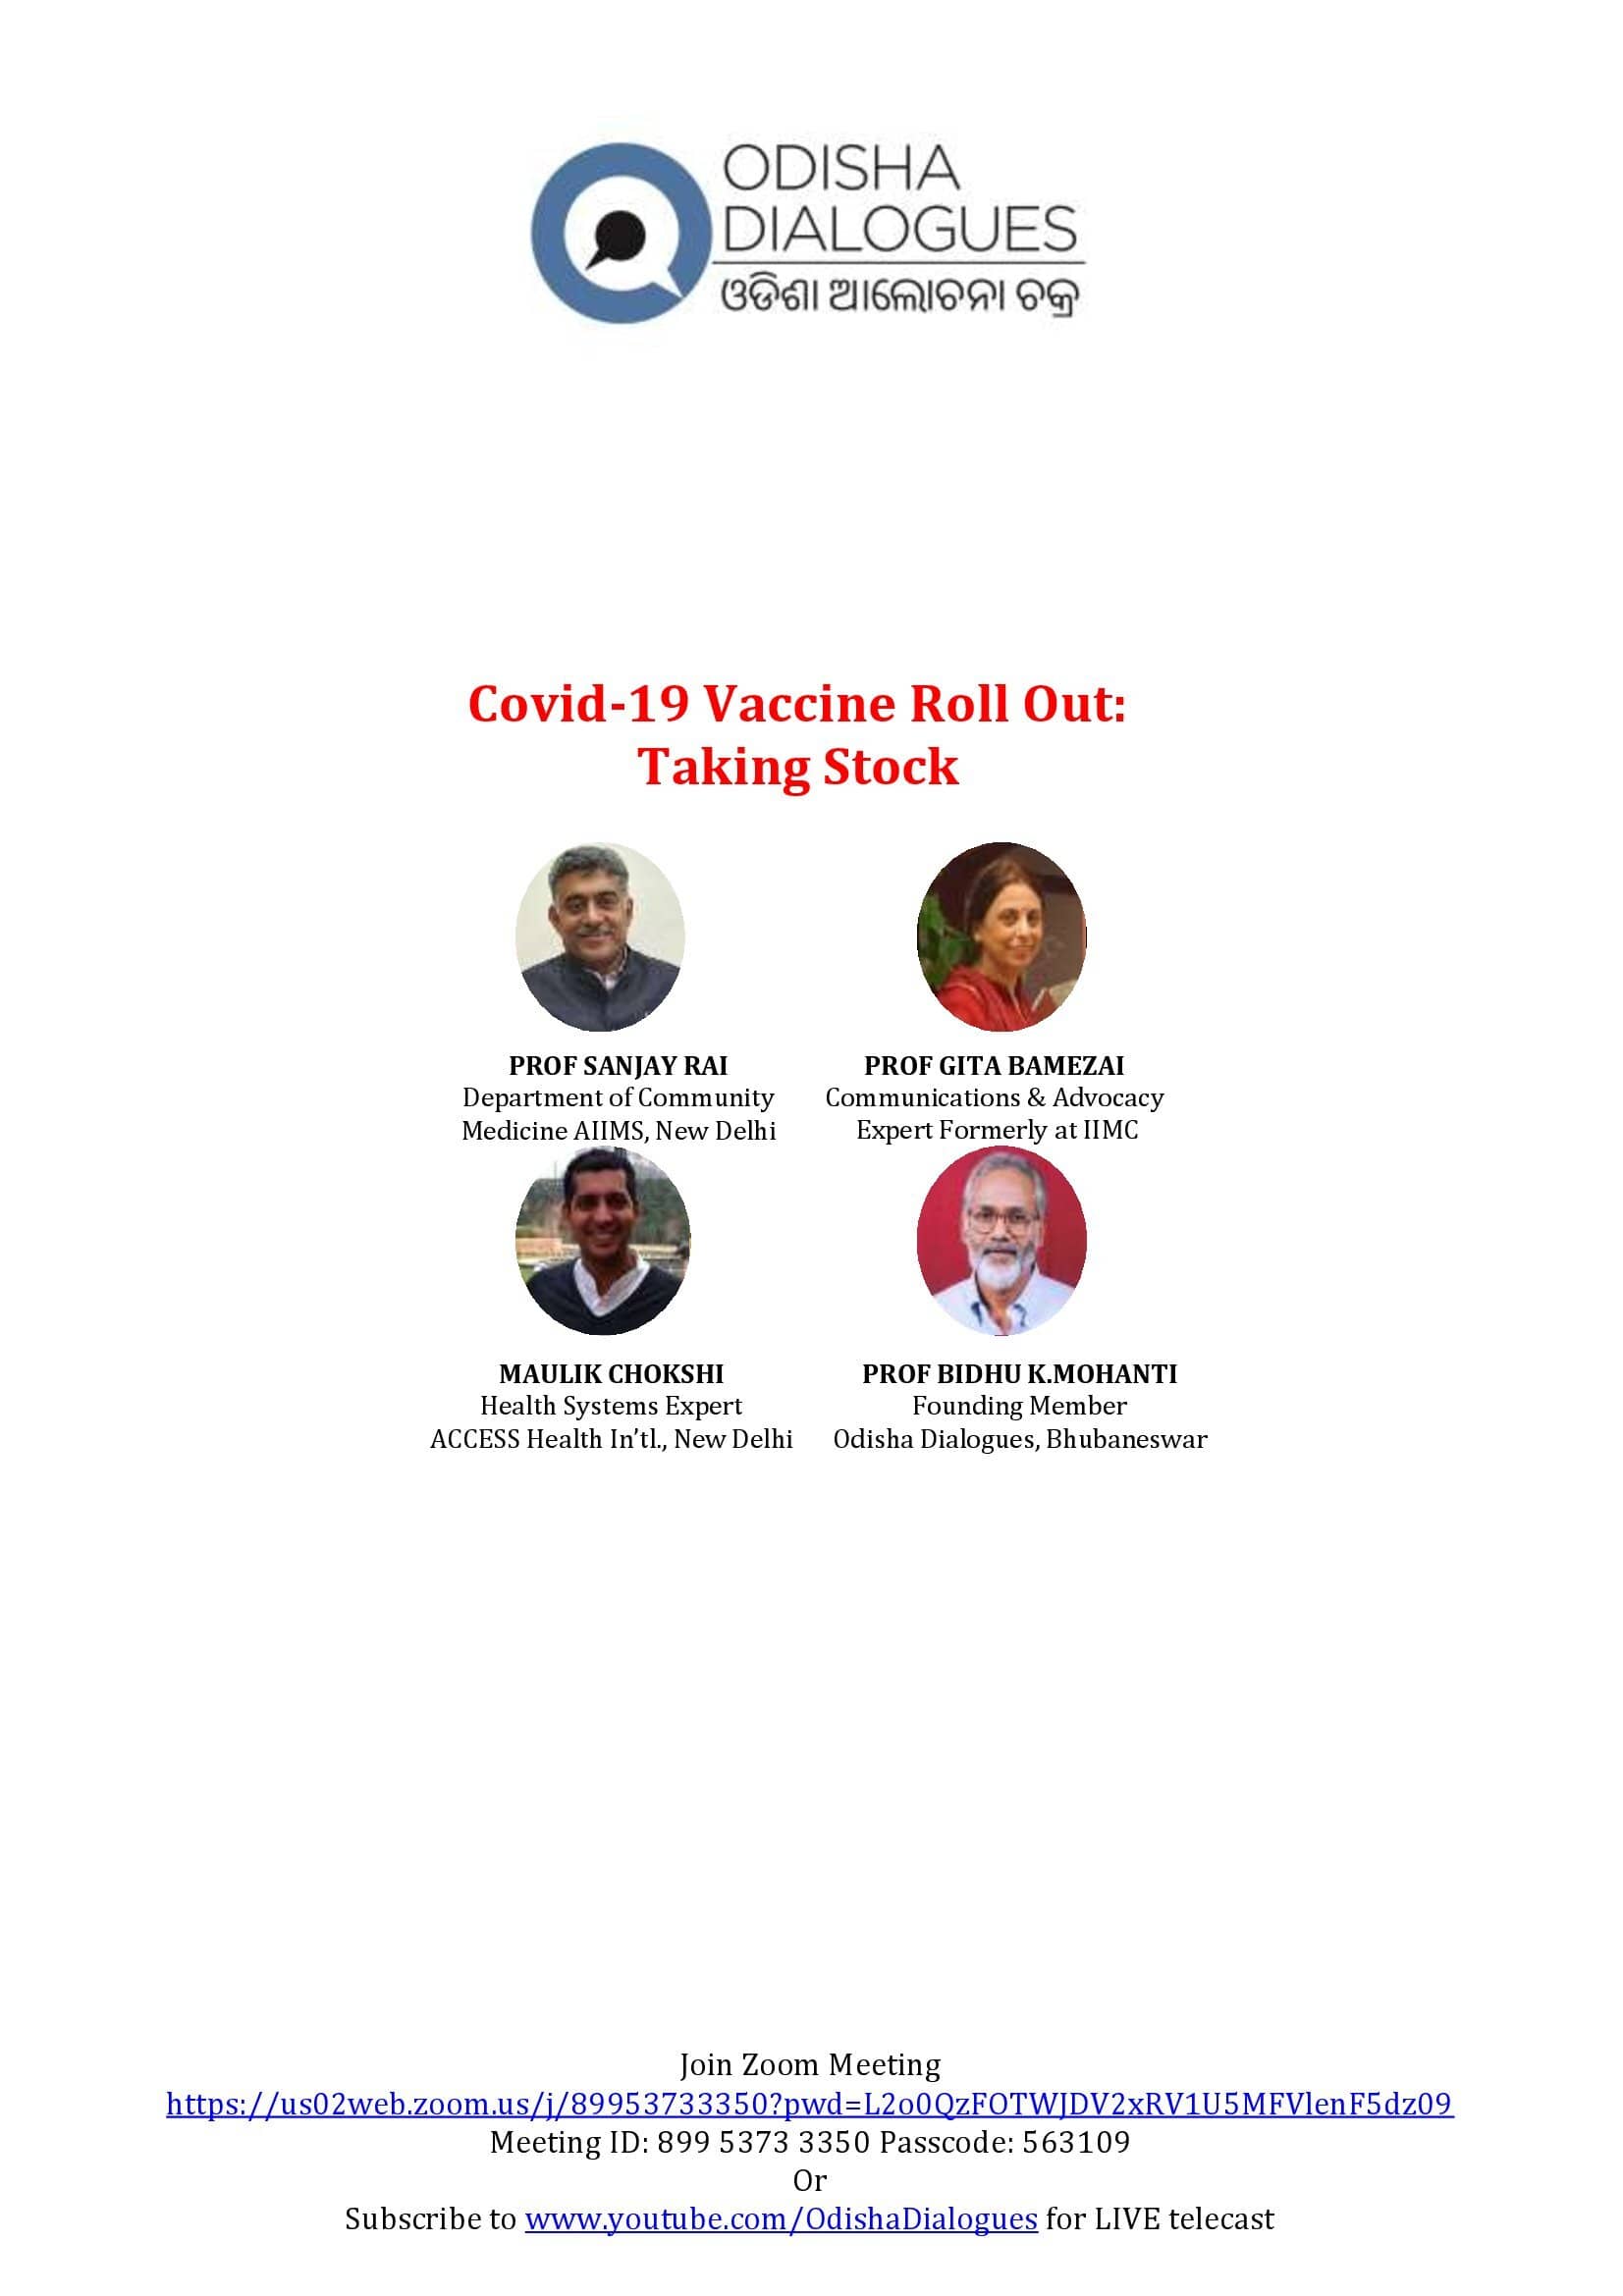 Covid-19 Vaccine Roll Out: Taking Stock